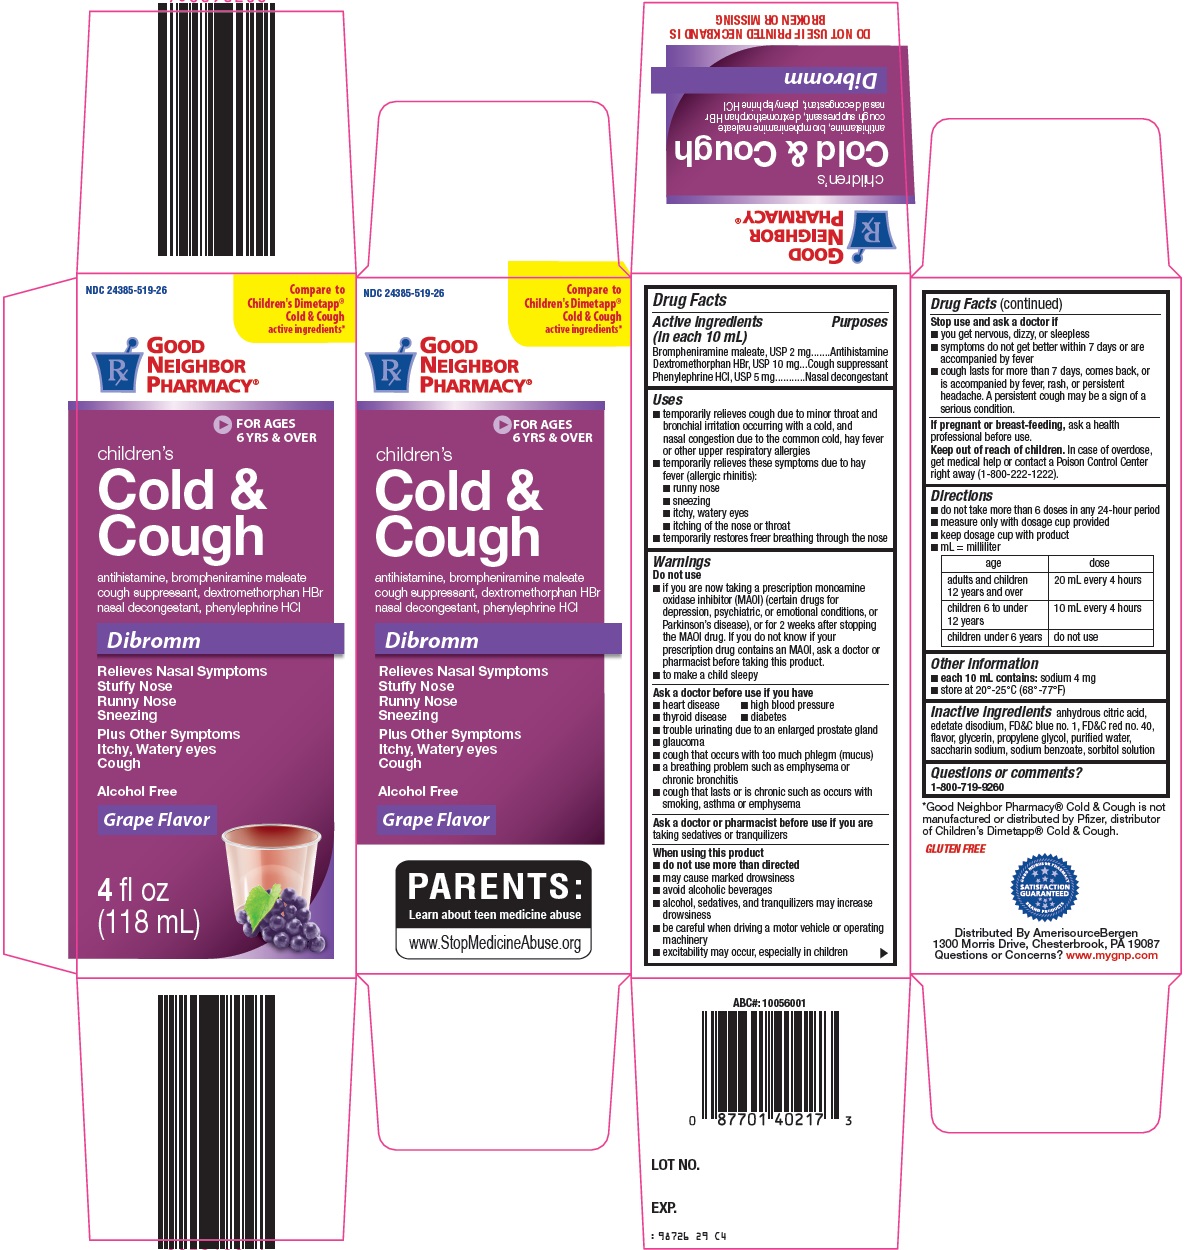 Good Neighbor Pharmacy Children's Cold & Cough image